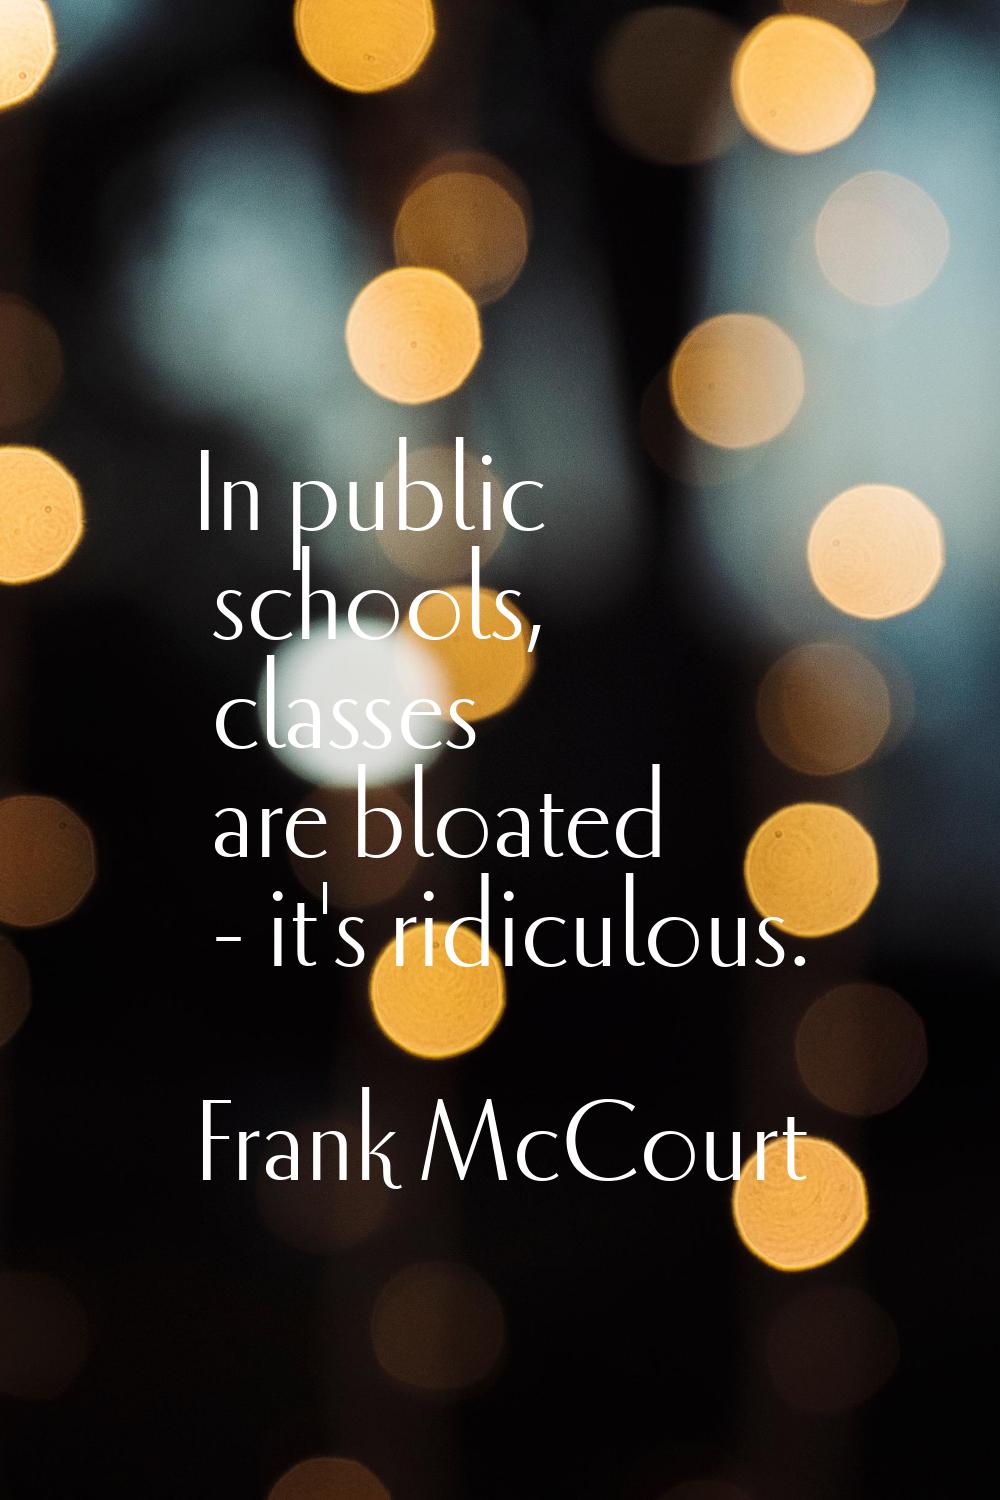 In public schools, classes are bloated - it's ridiculous.